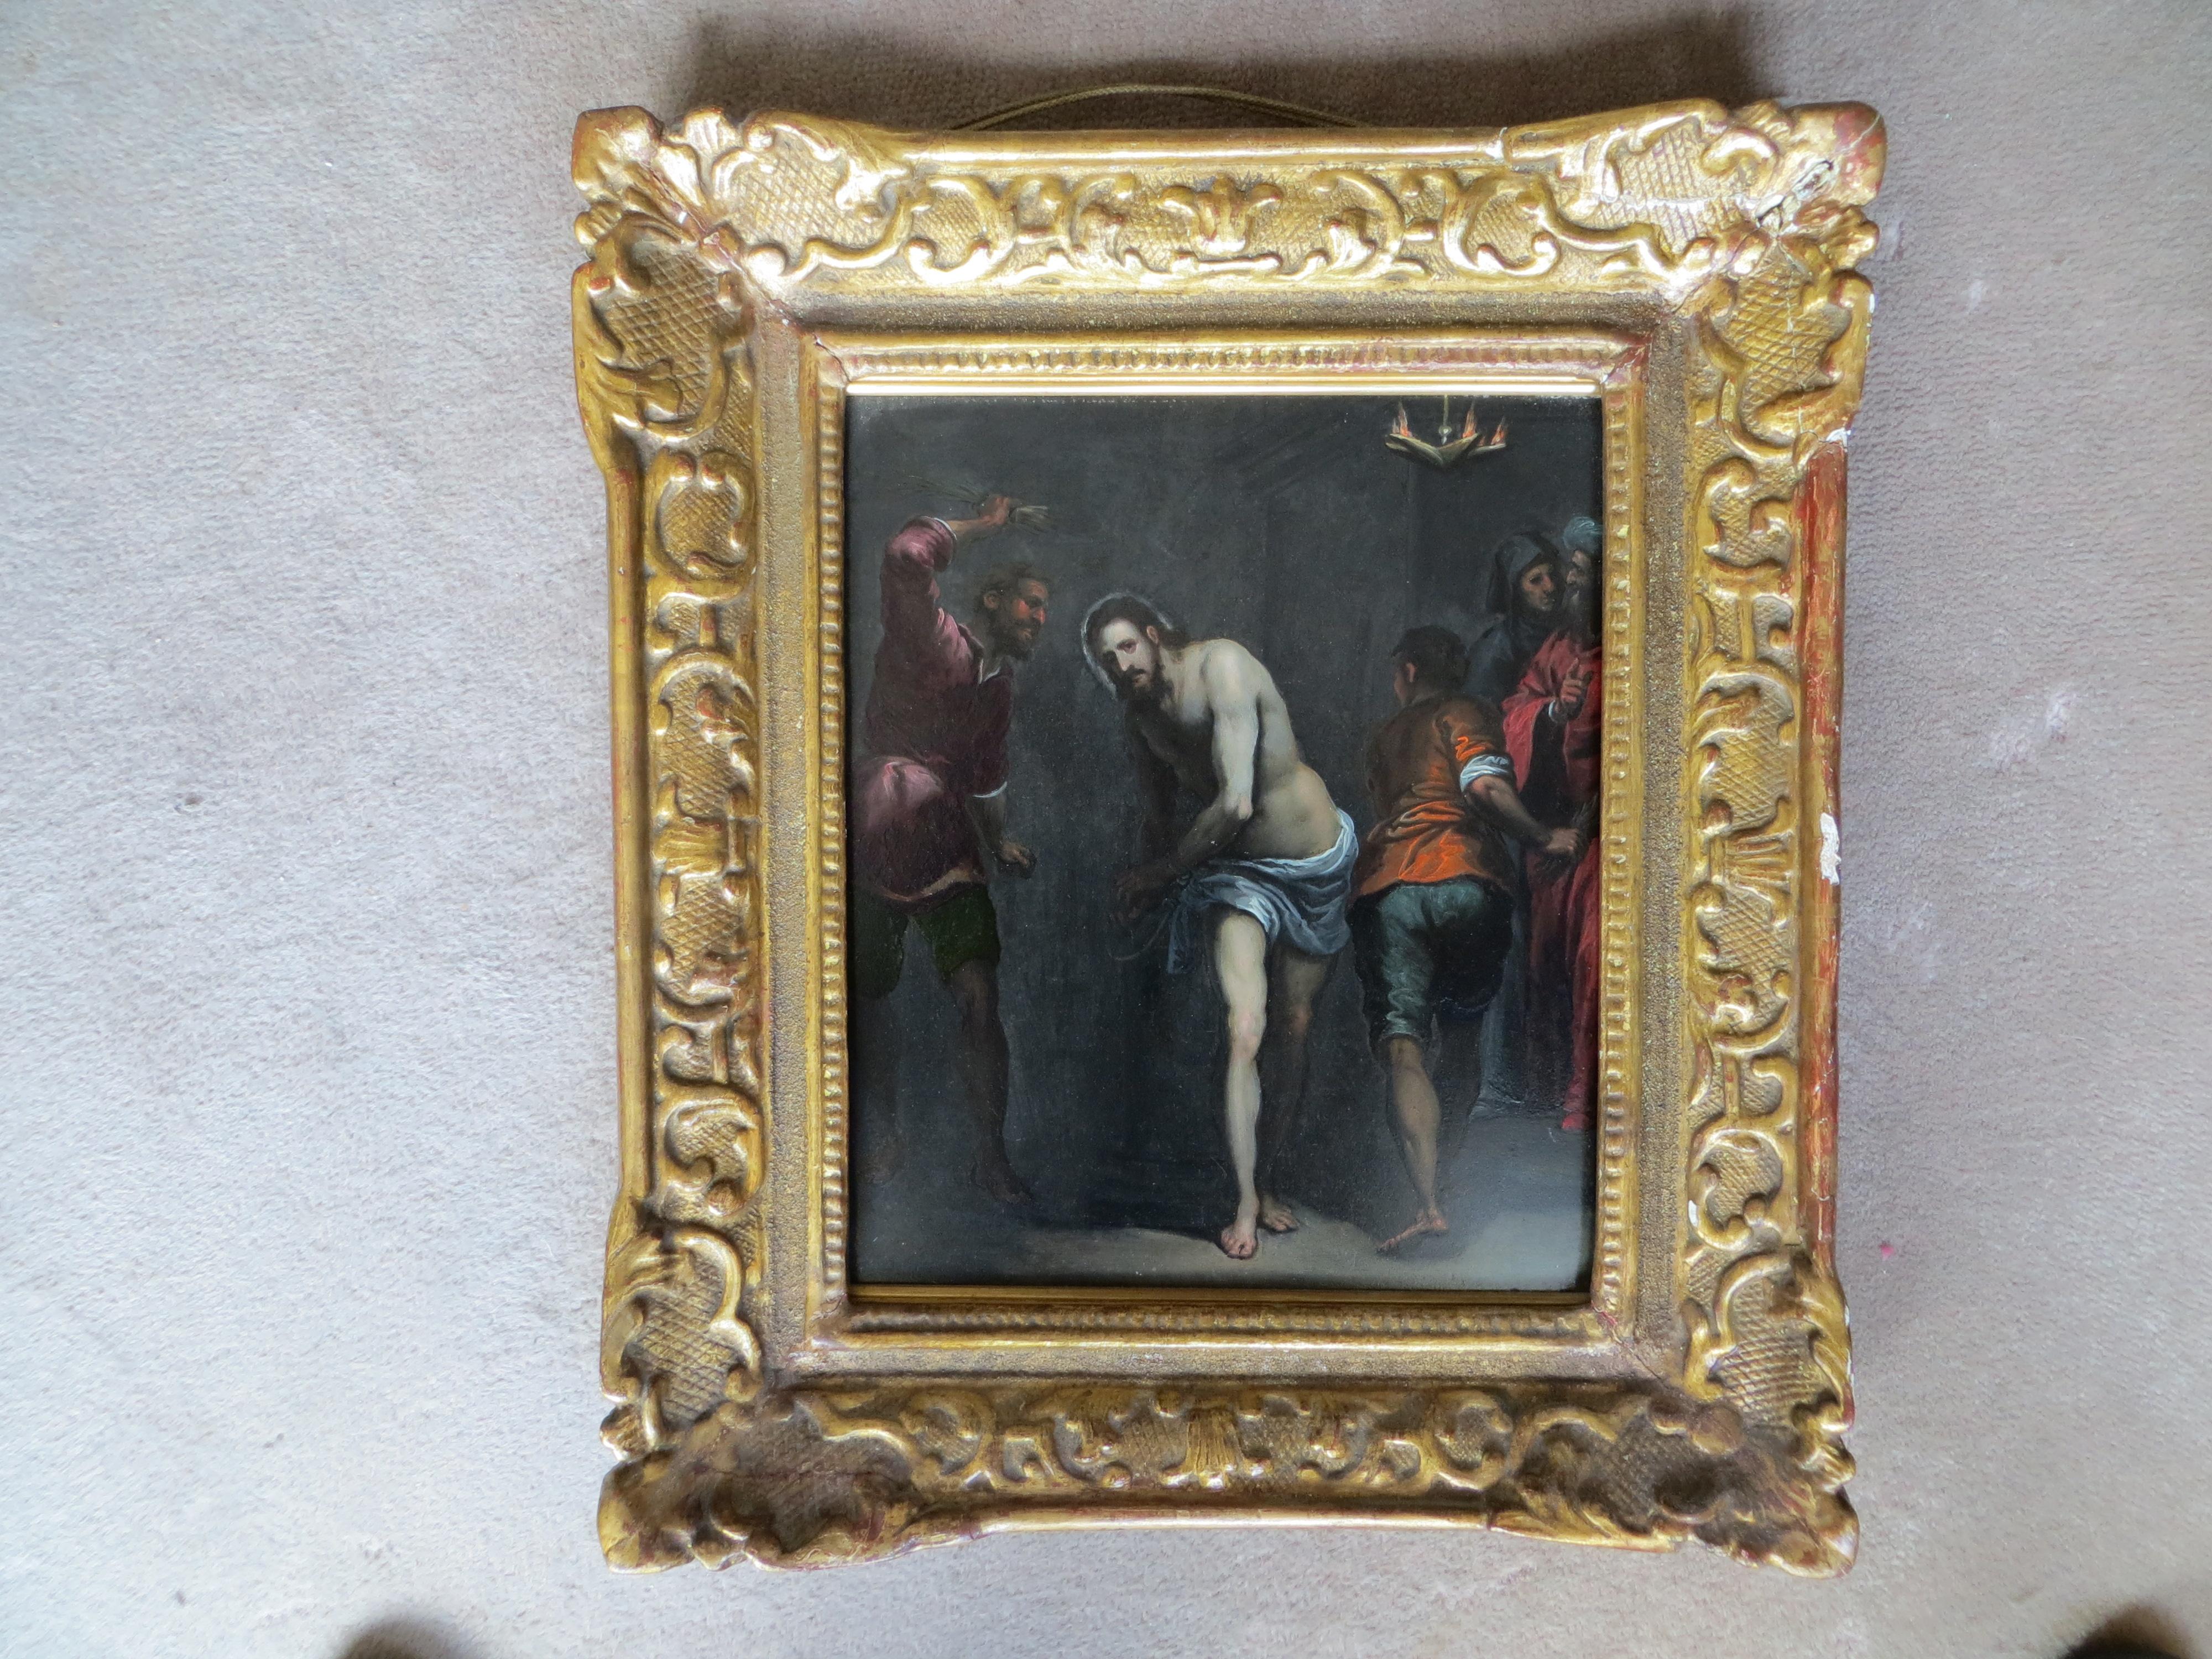  Christ lynched  - Painting by Unknown